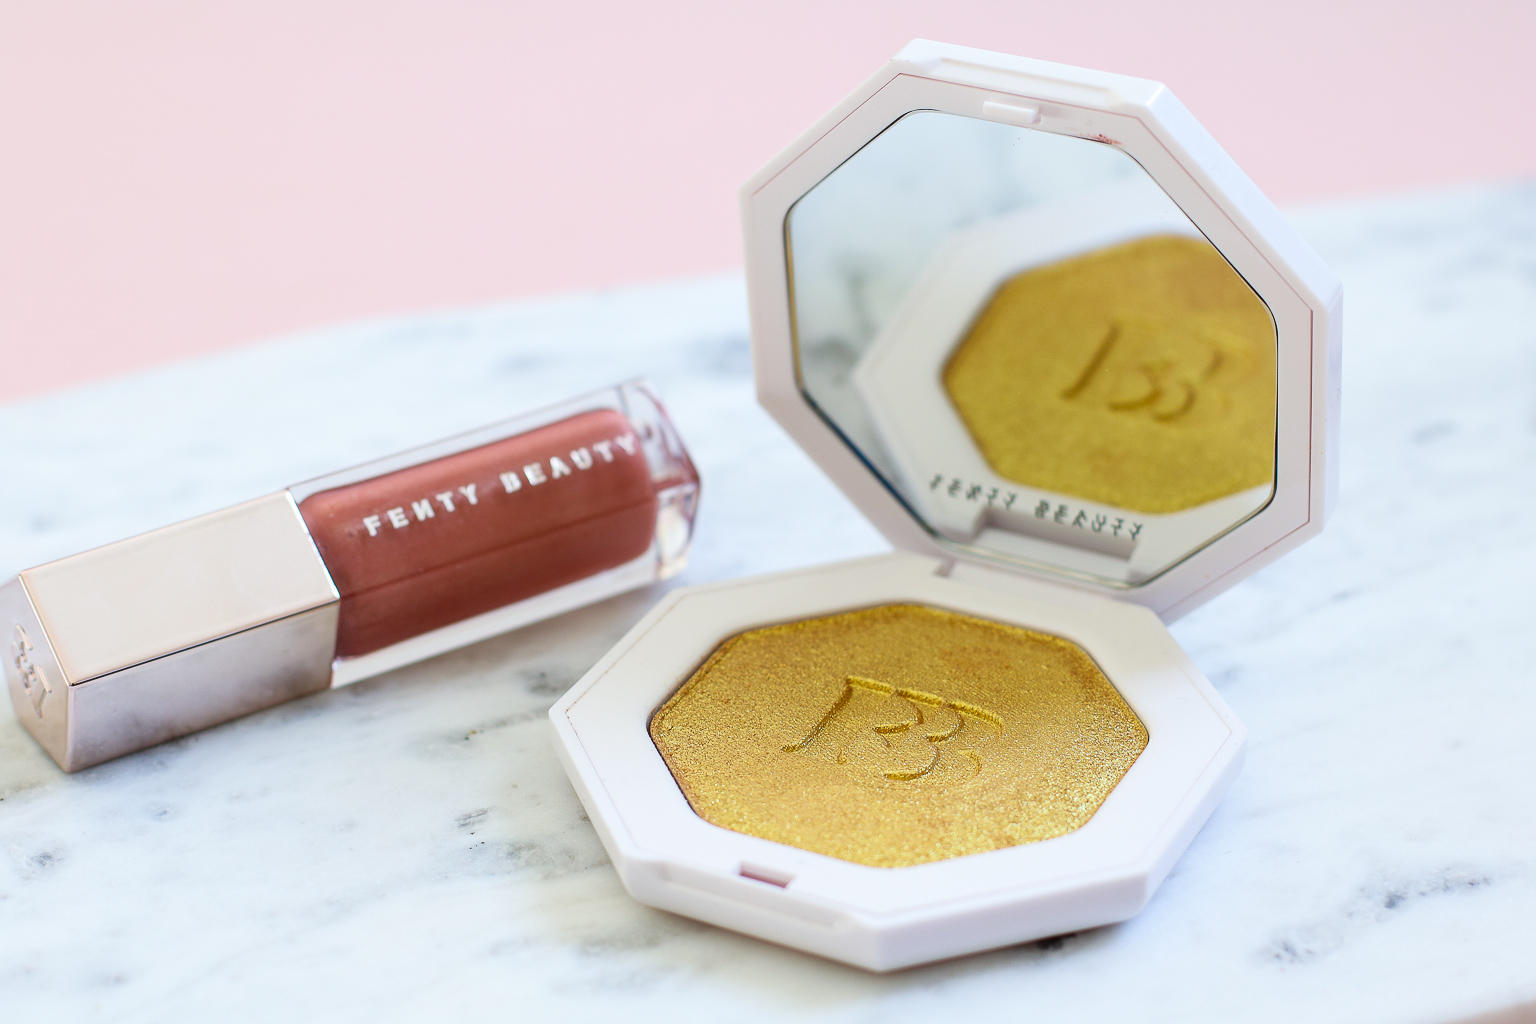 Is Fenty Beauty worth the hype? Read this before you invest!